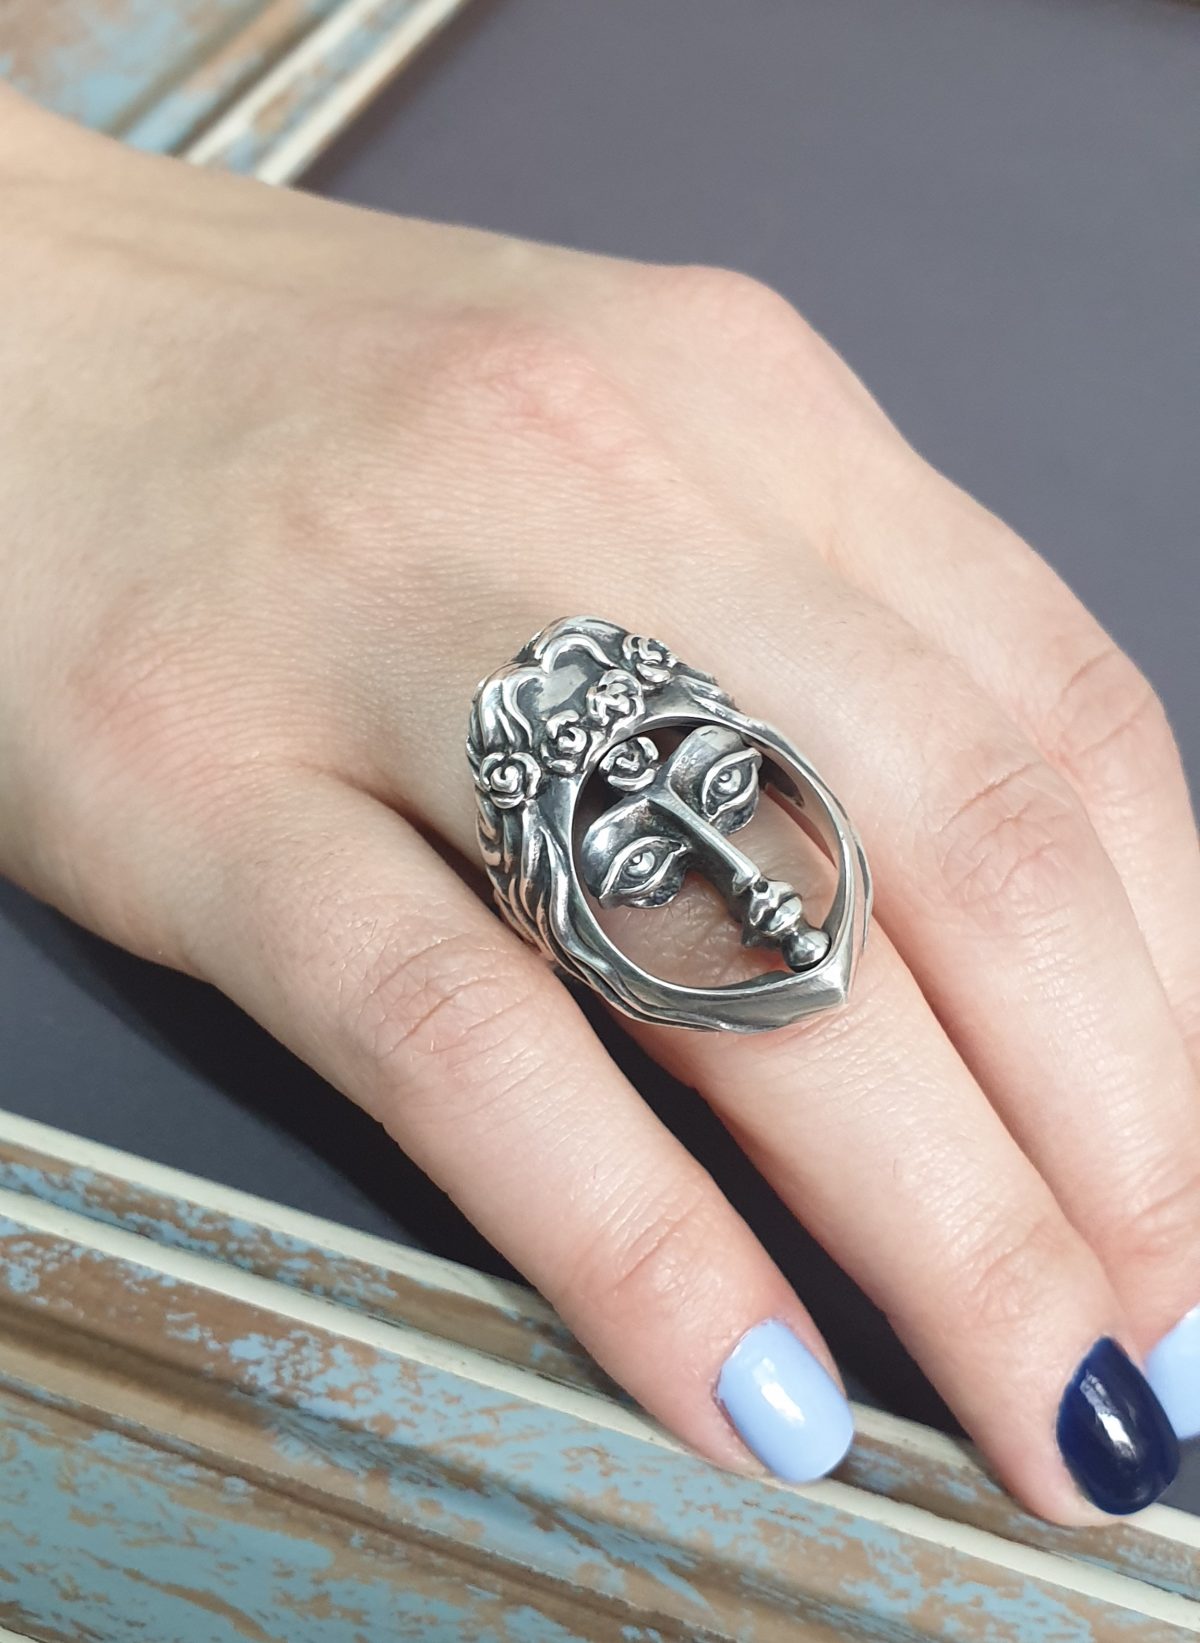 Ring Transformer Two Faces Sterling Silver 925